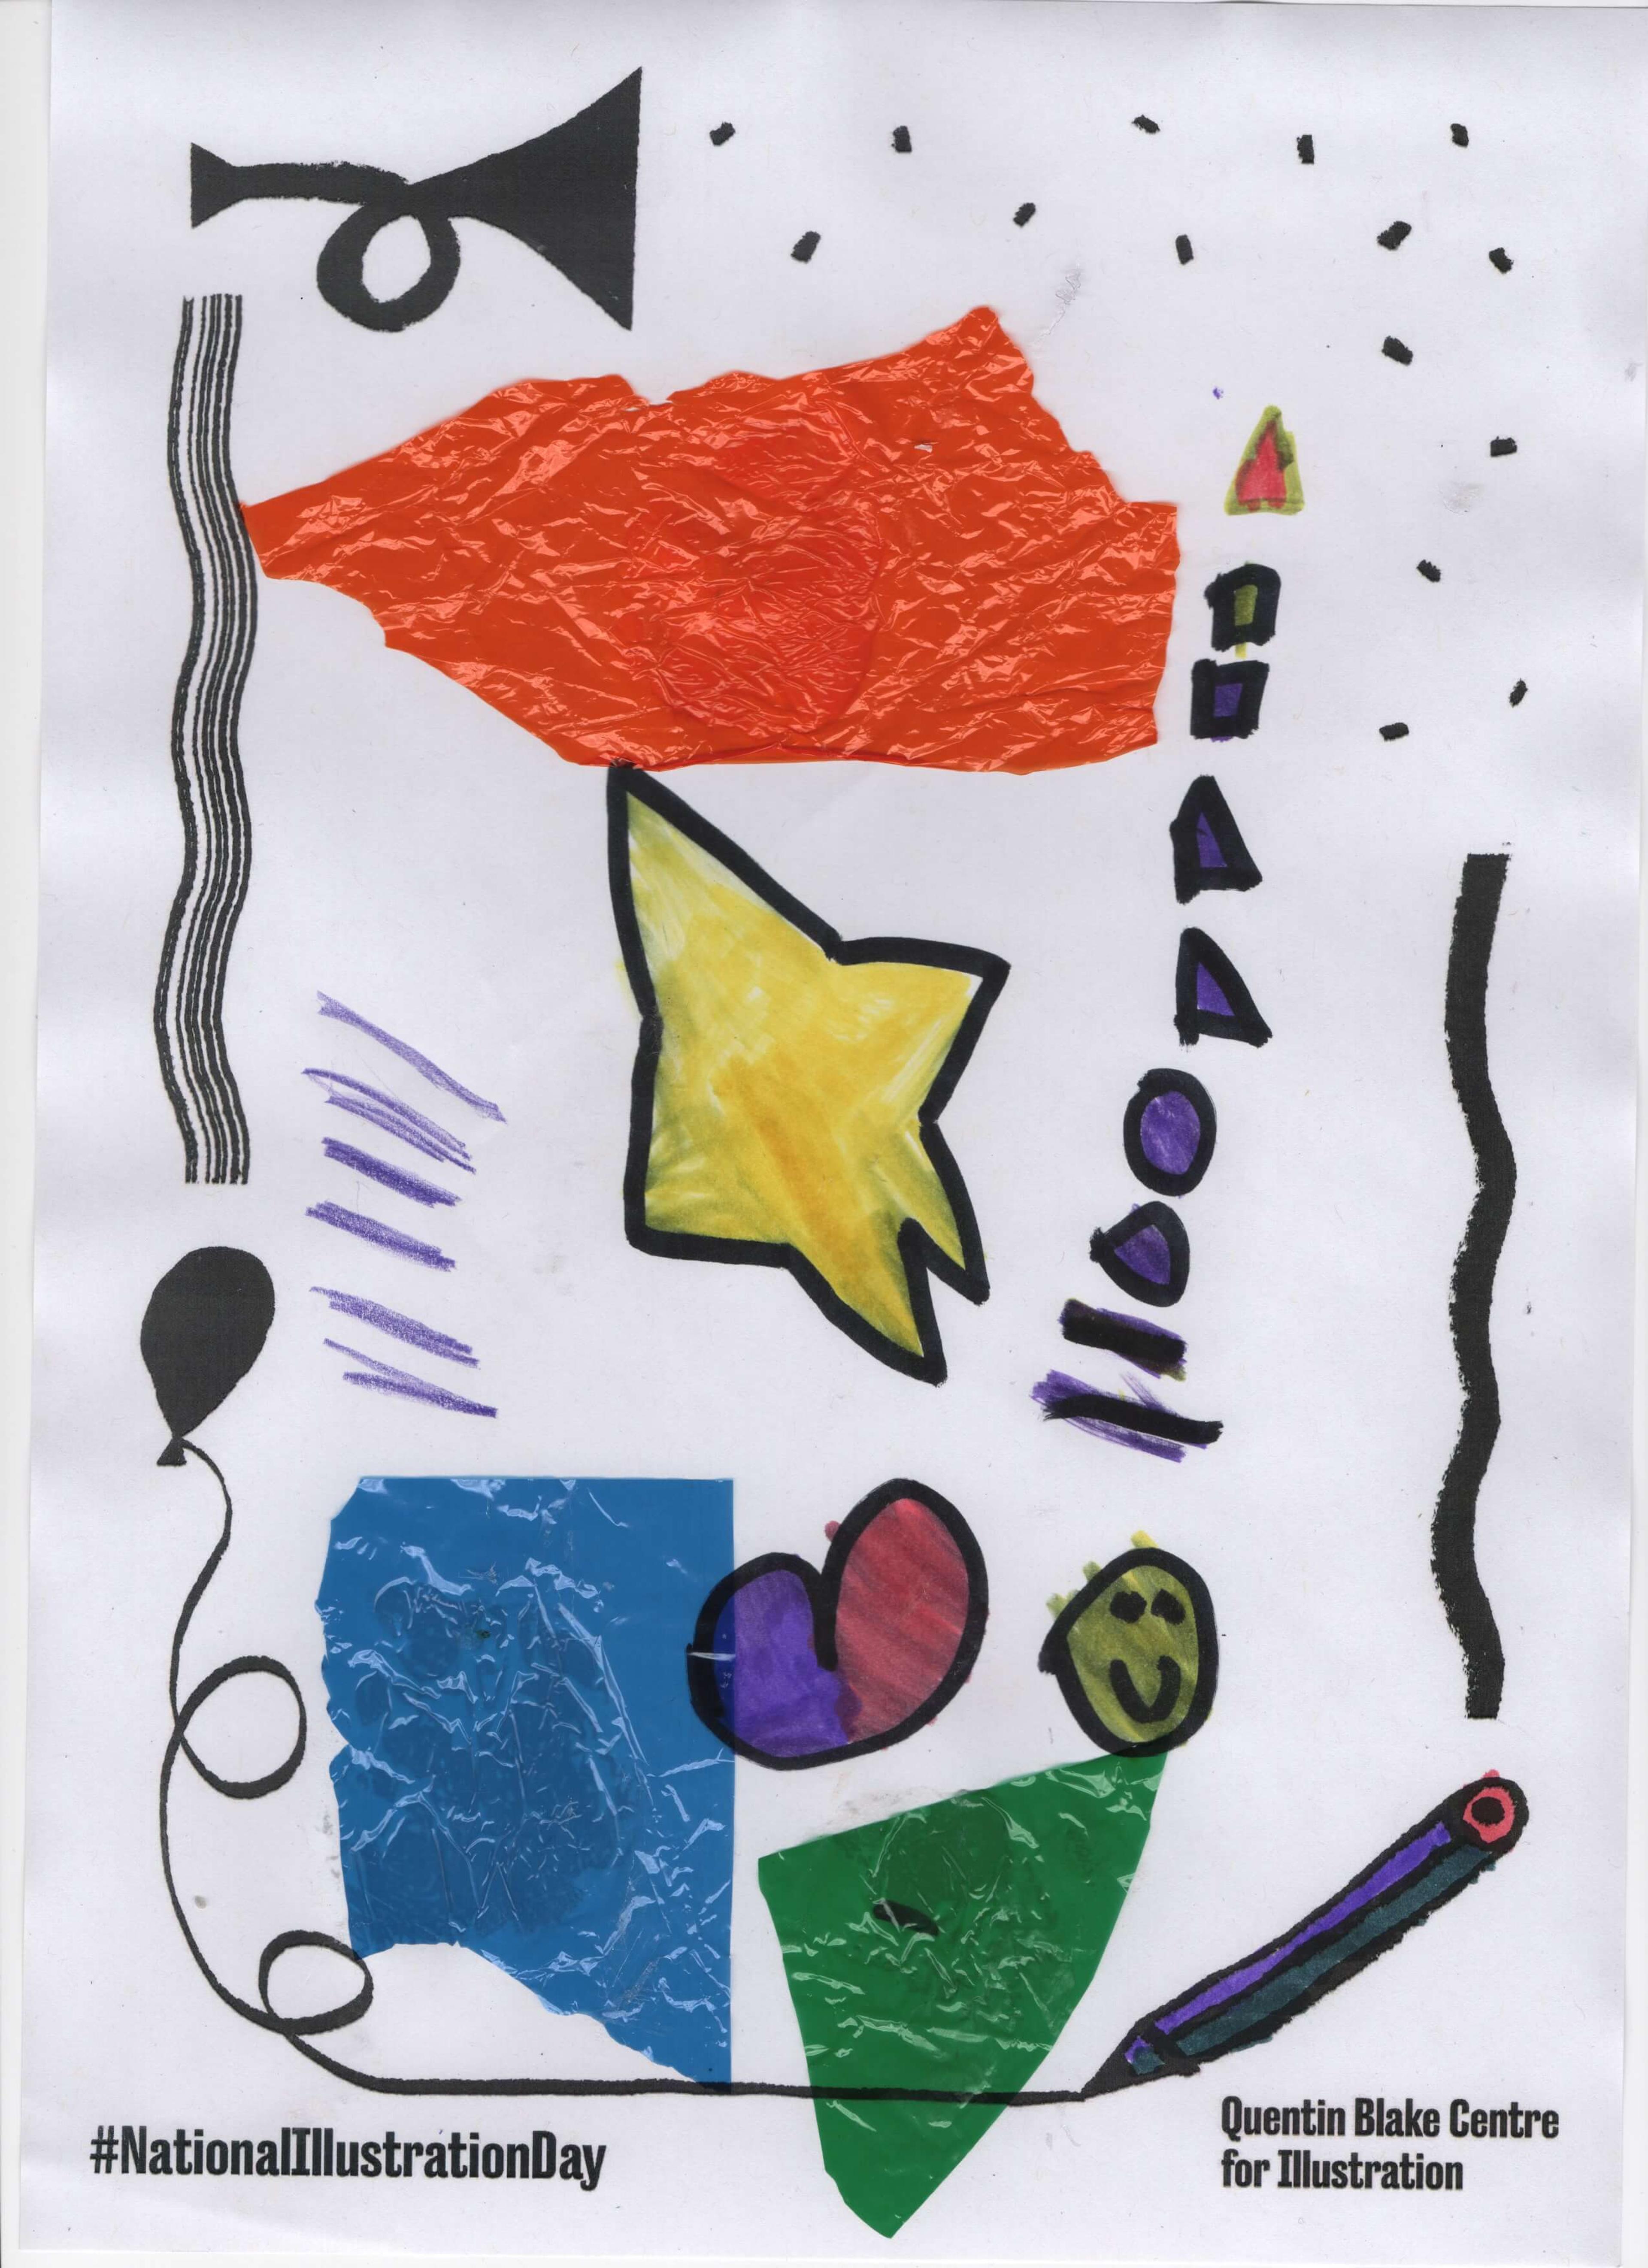 Drawn and collaged abstract shapes in a variety of colours. The picture also includes on smiley face. 